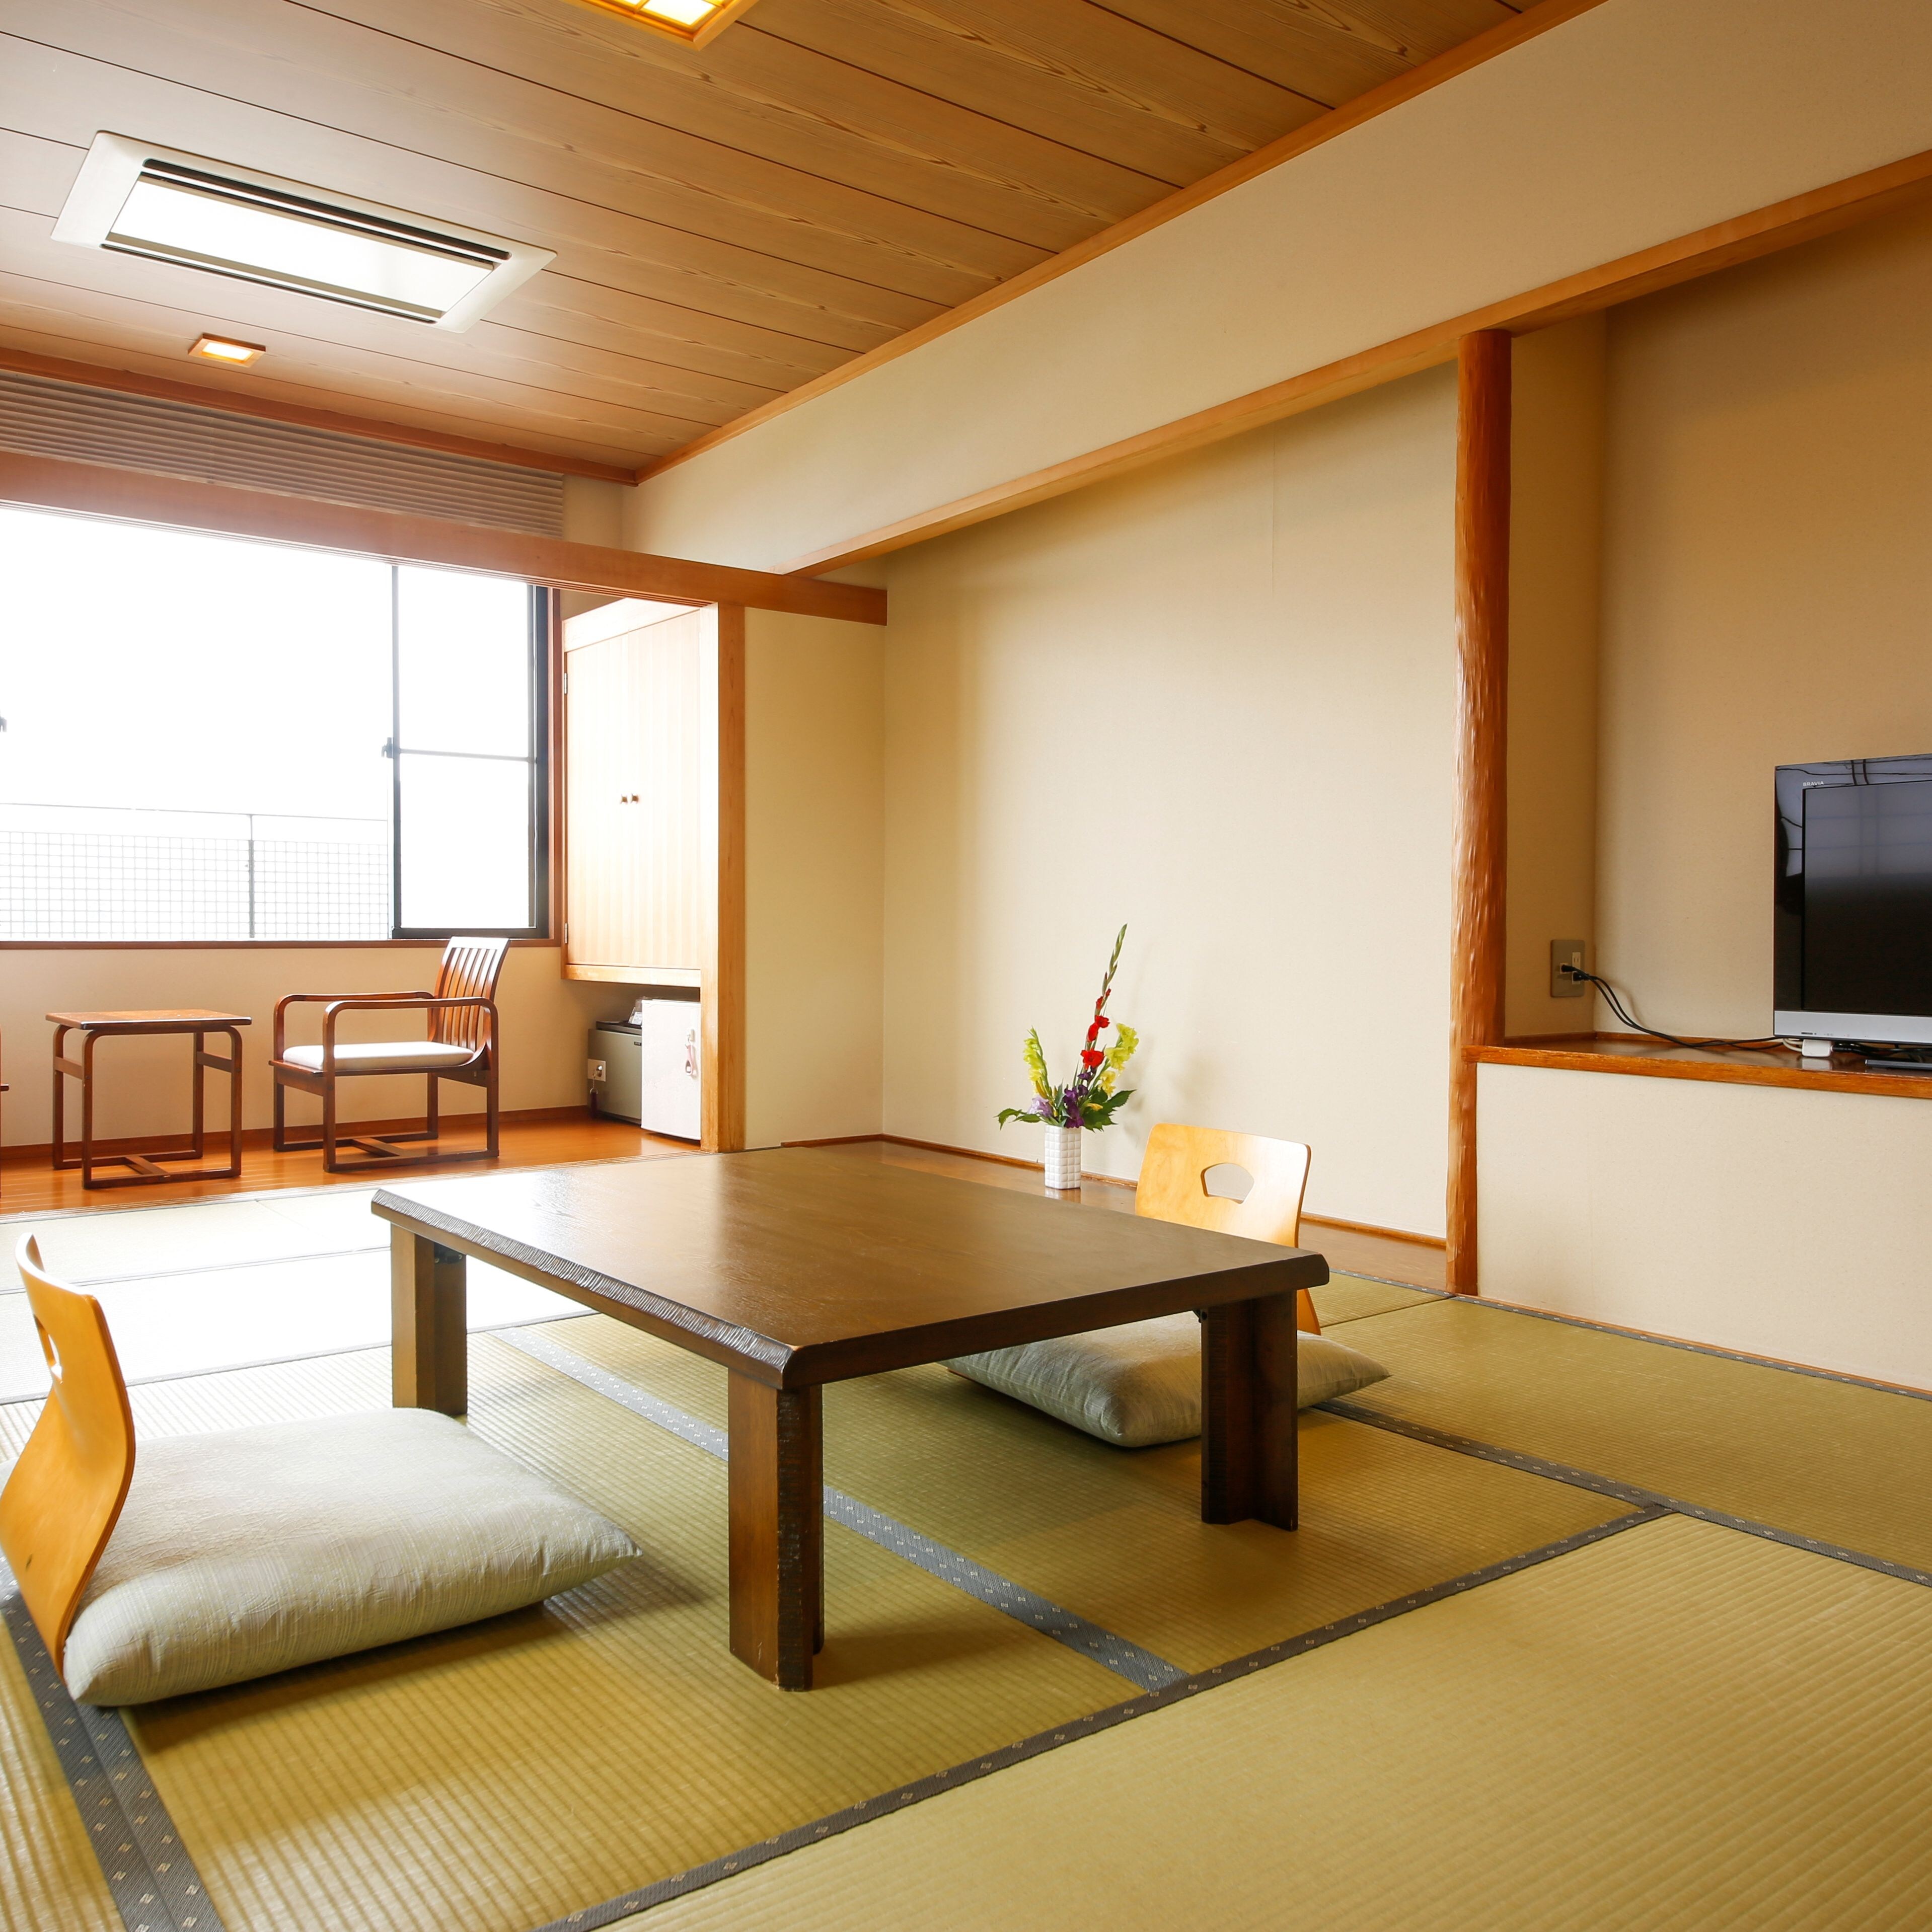 In a clean and quiet Japanese-style room, you can forget about the hustle and bustle of everyday life and relax.